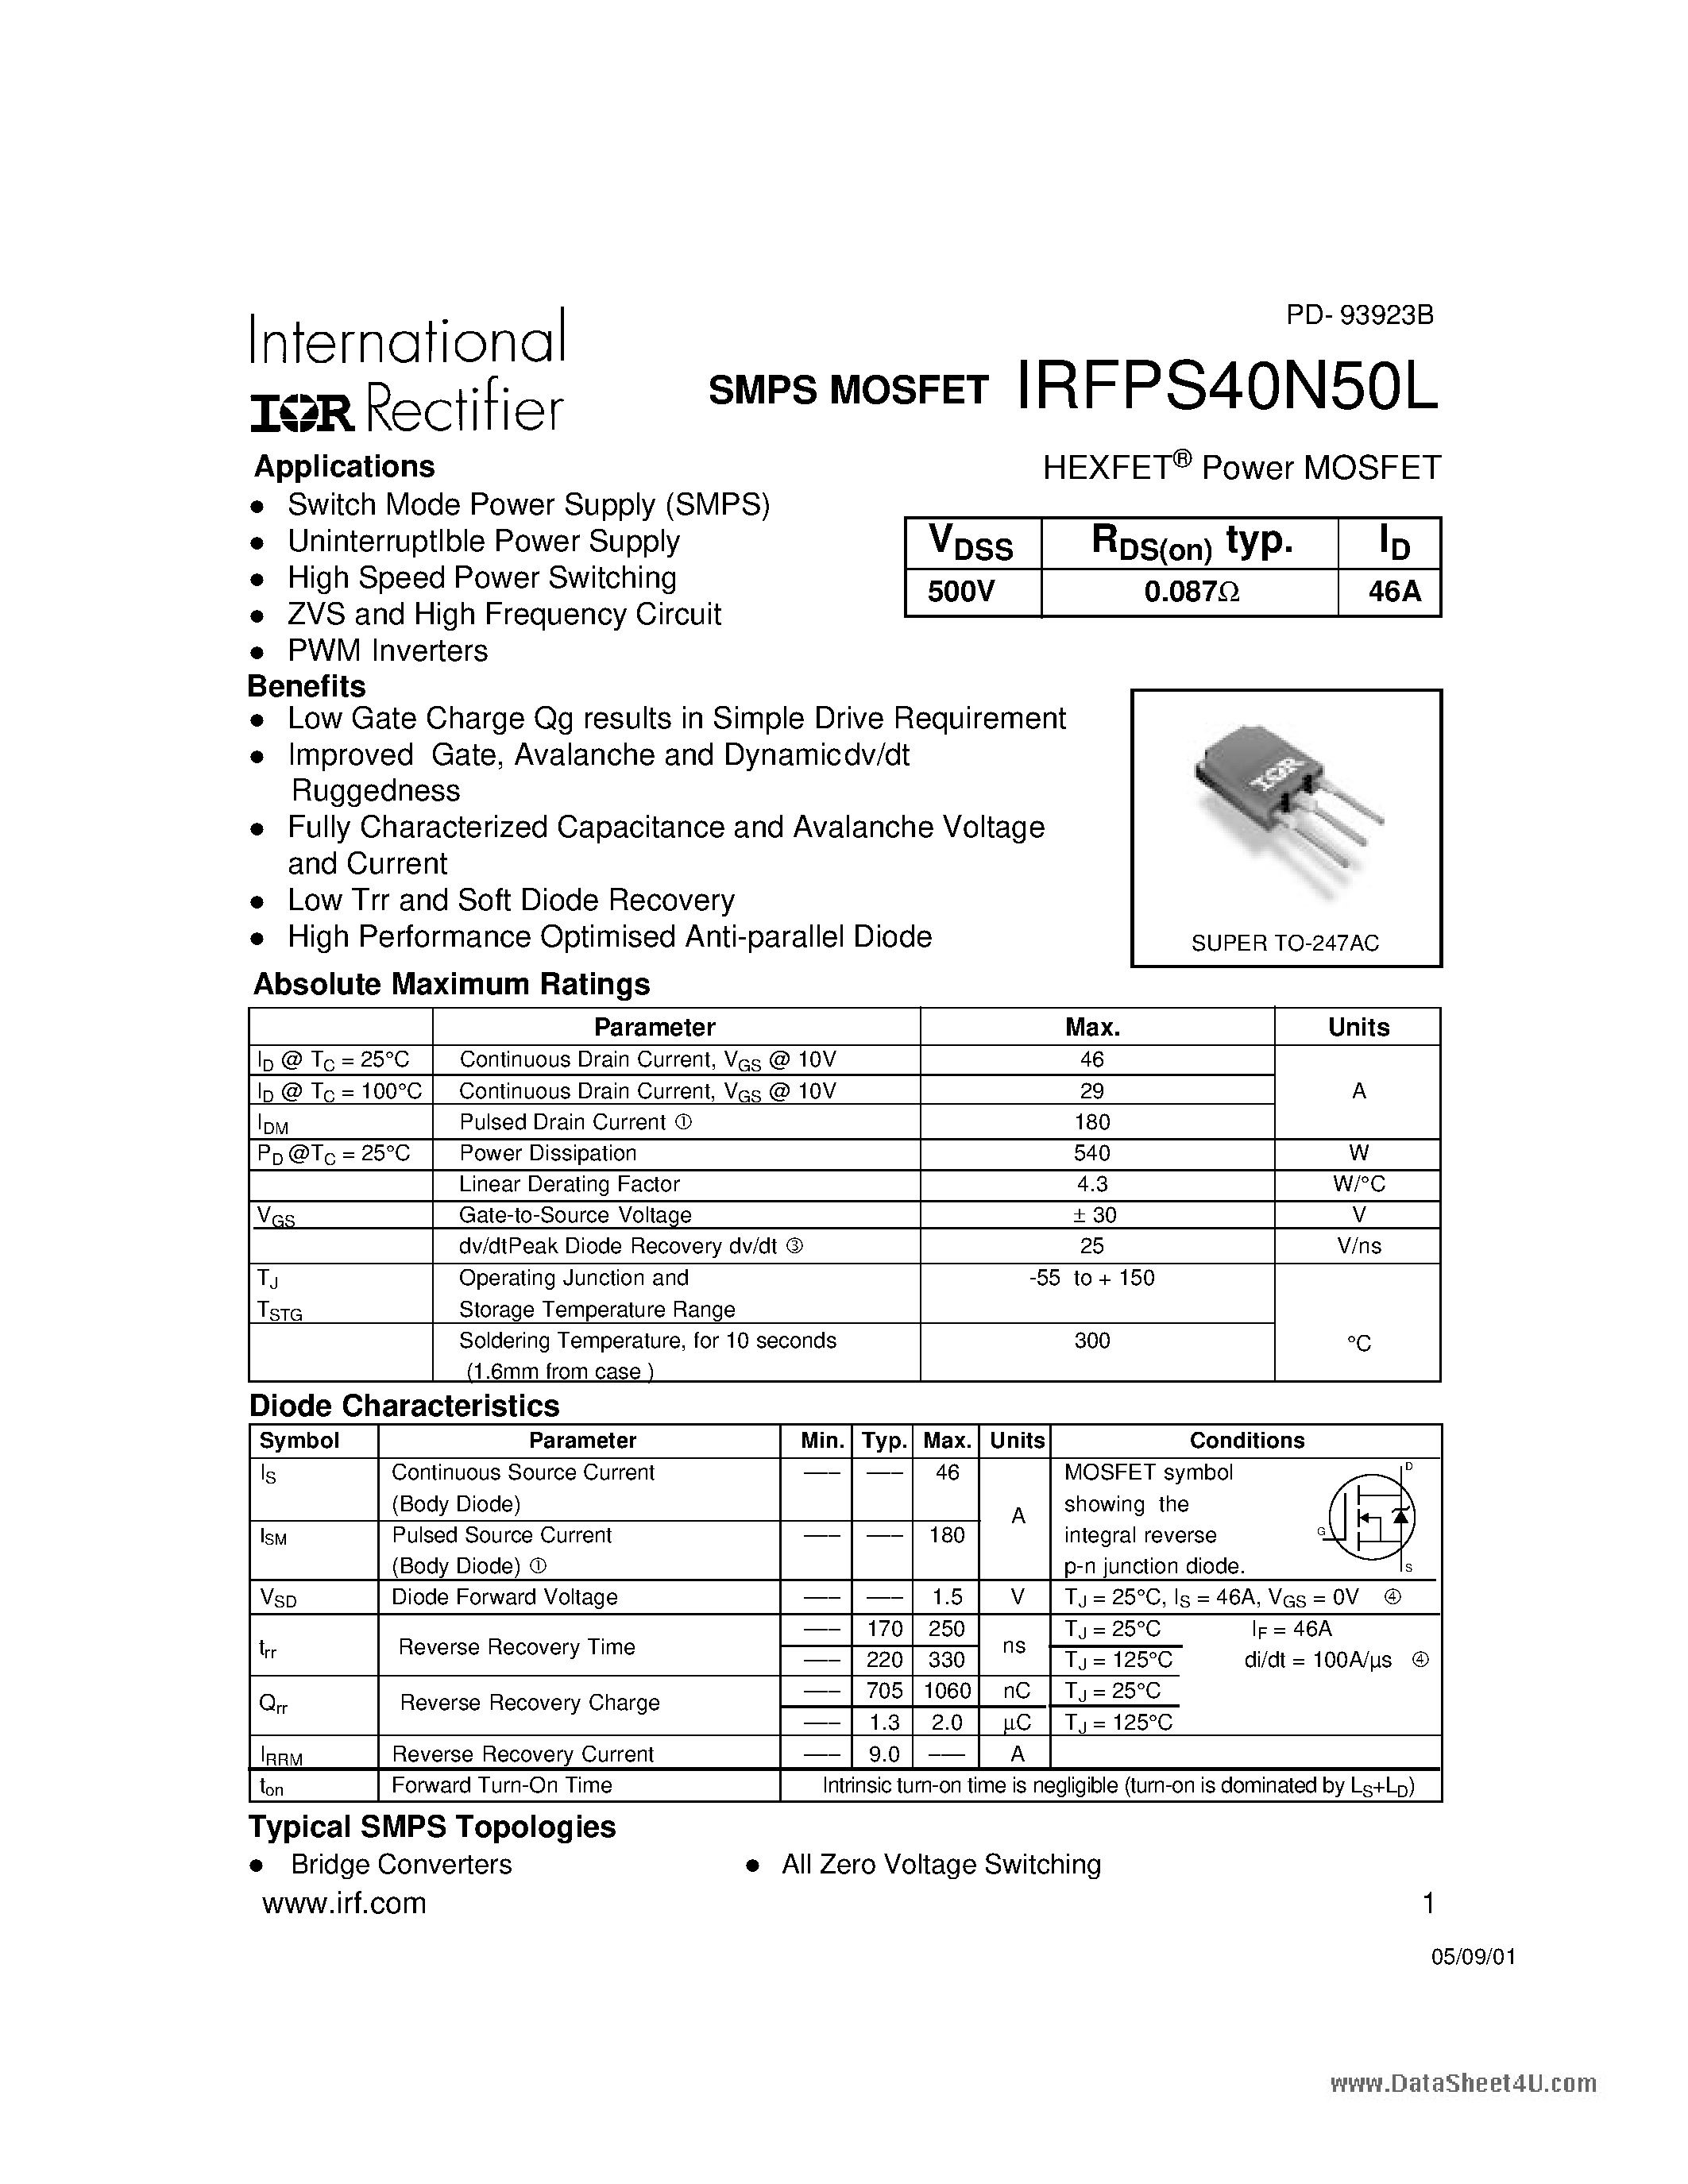 Datasheet IRFPS40N50L - HEXFET Power MOSFET page 1